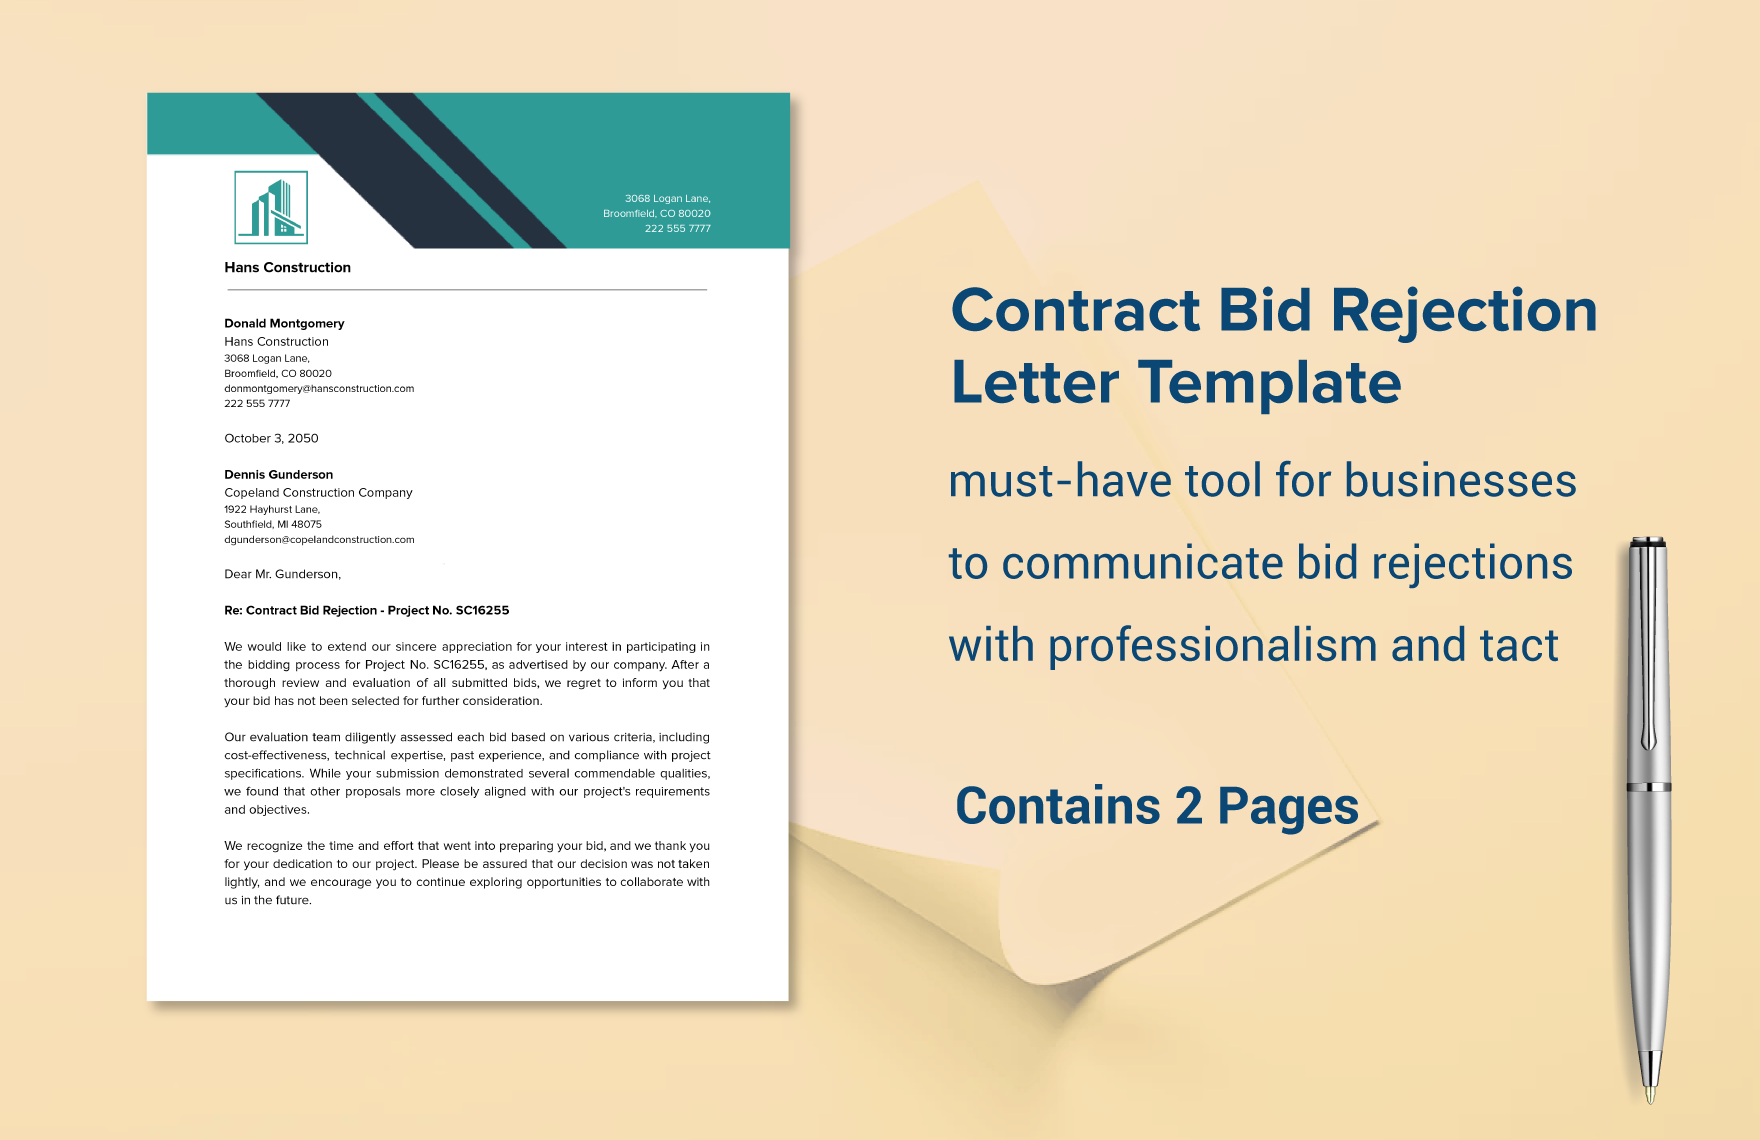 Contract Bid Rejection Letter Template